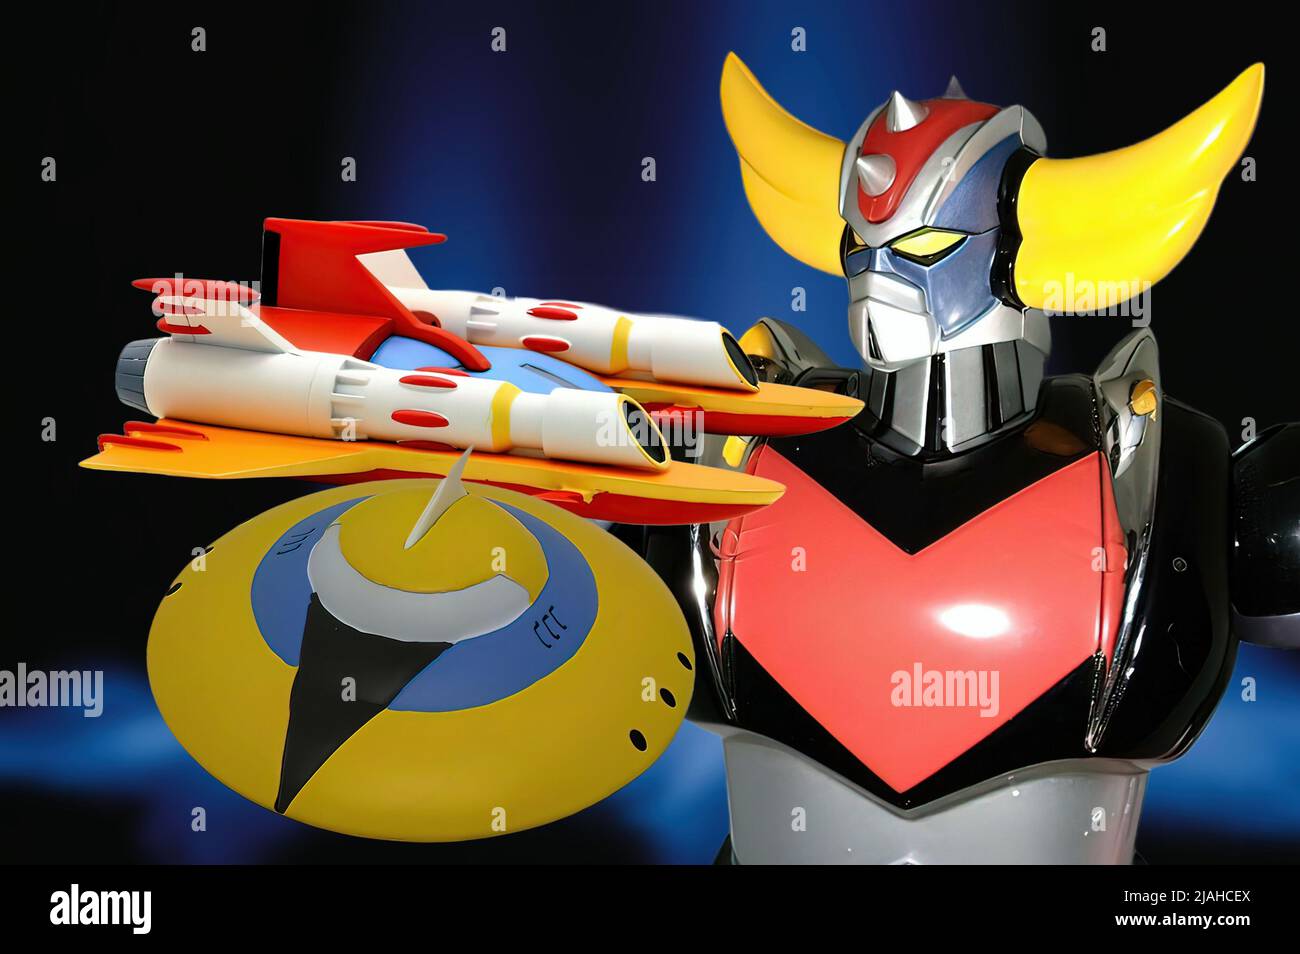 Some 80s toys depicting the iconic UFO character Robot Grendizer created by Manga artist Go Nagai Stock Photo